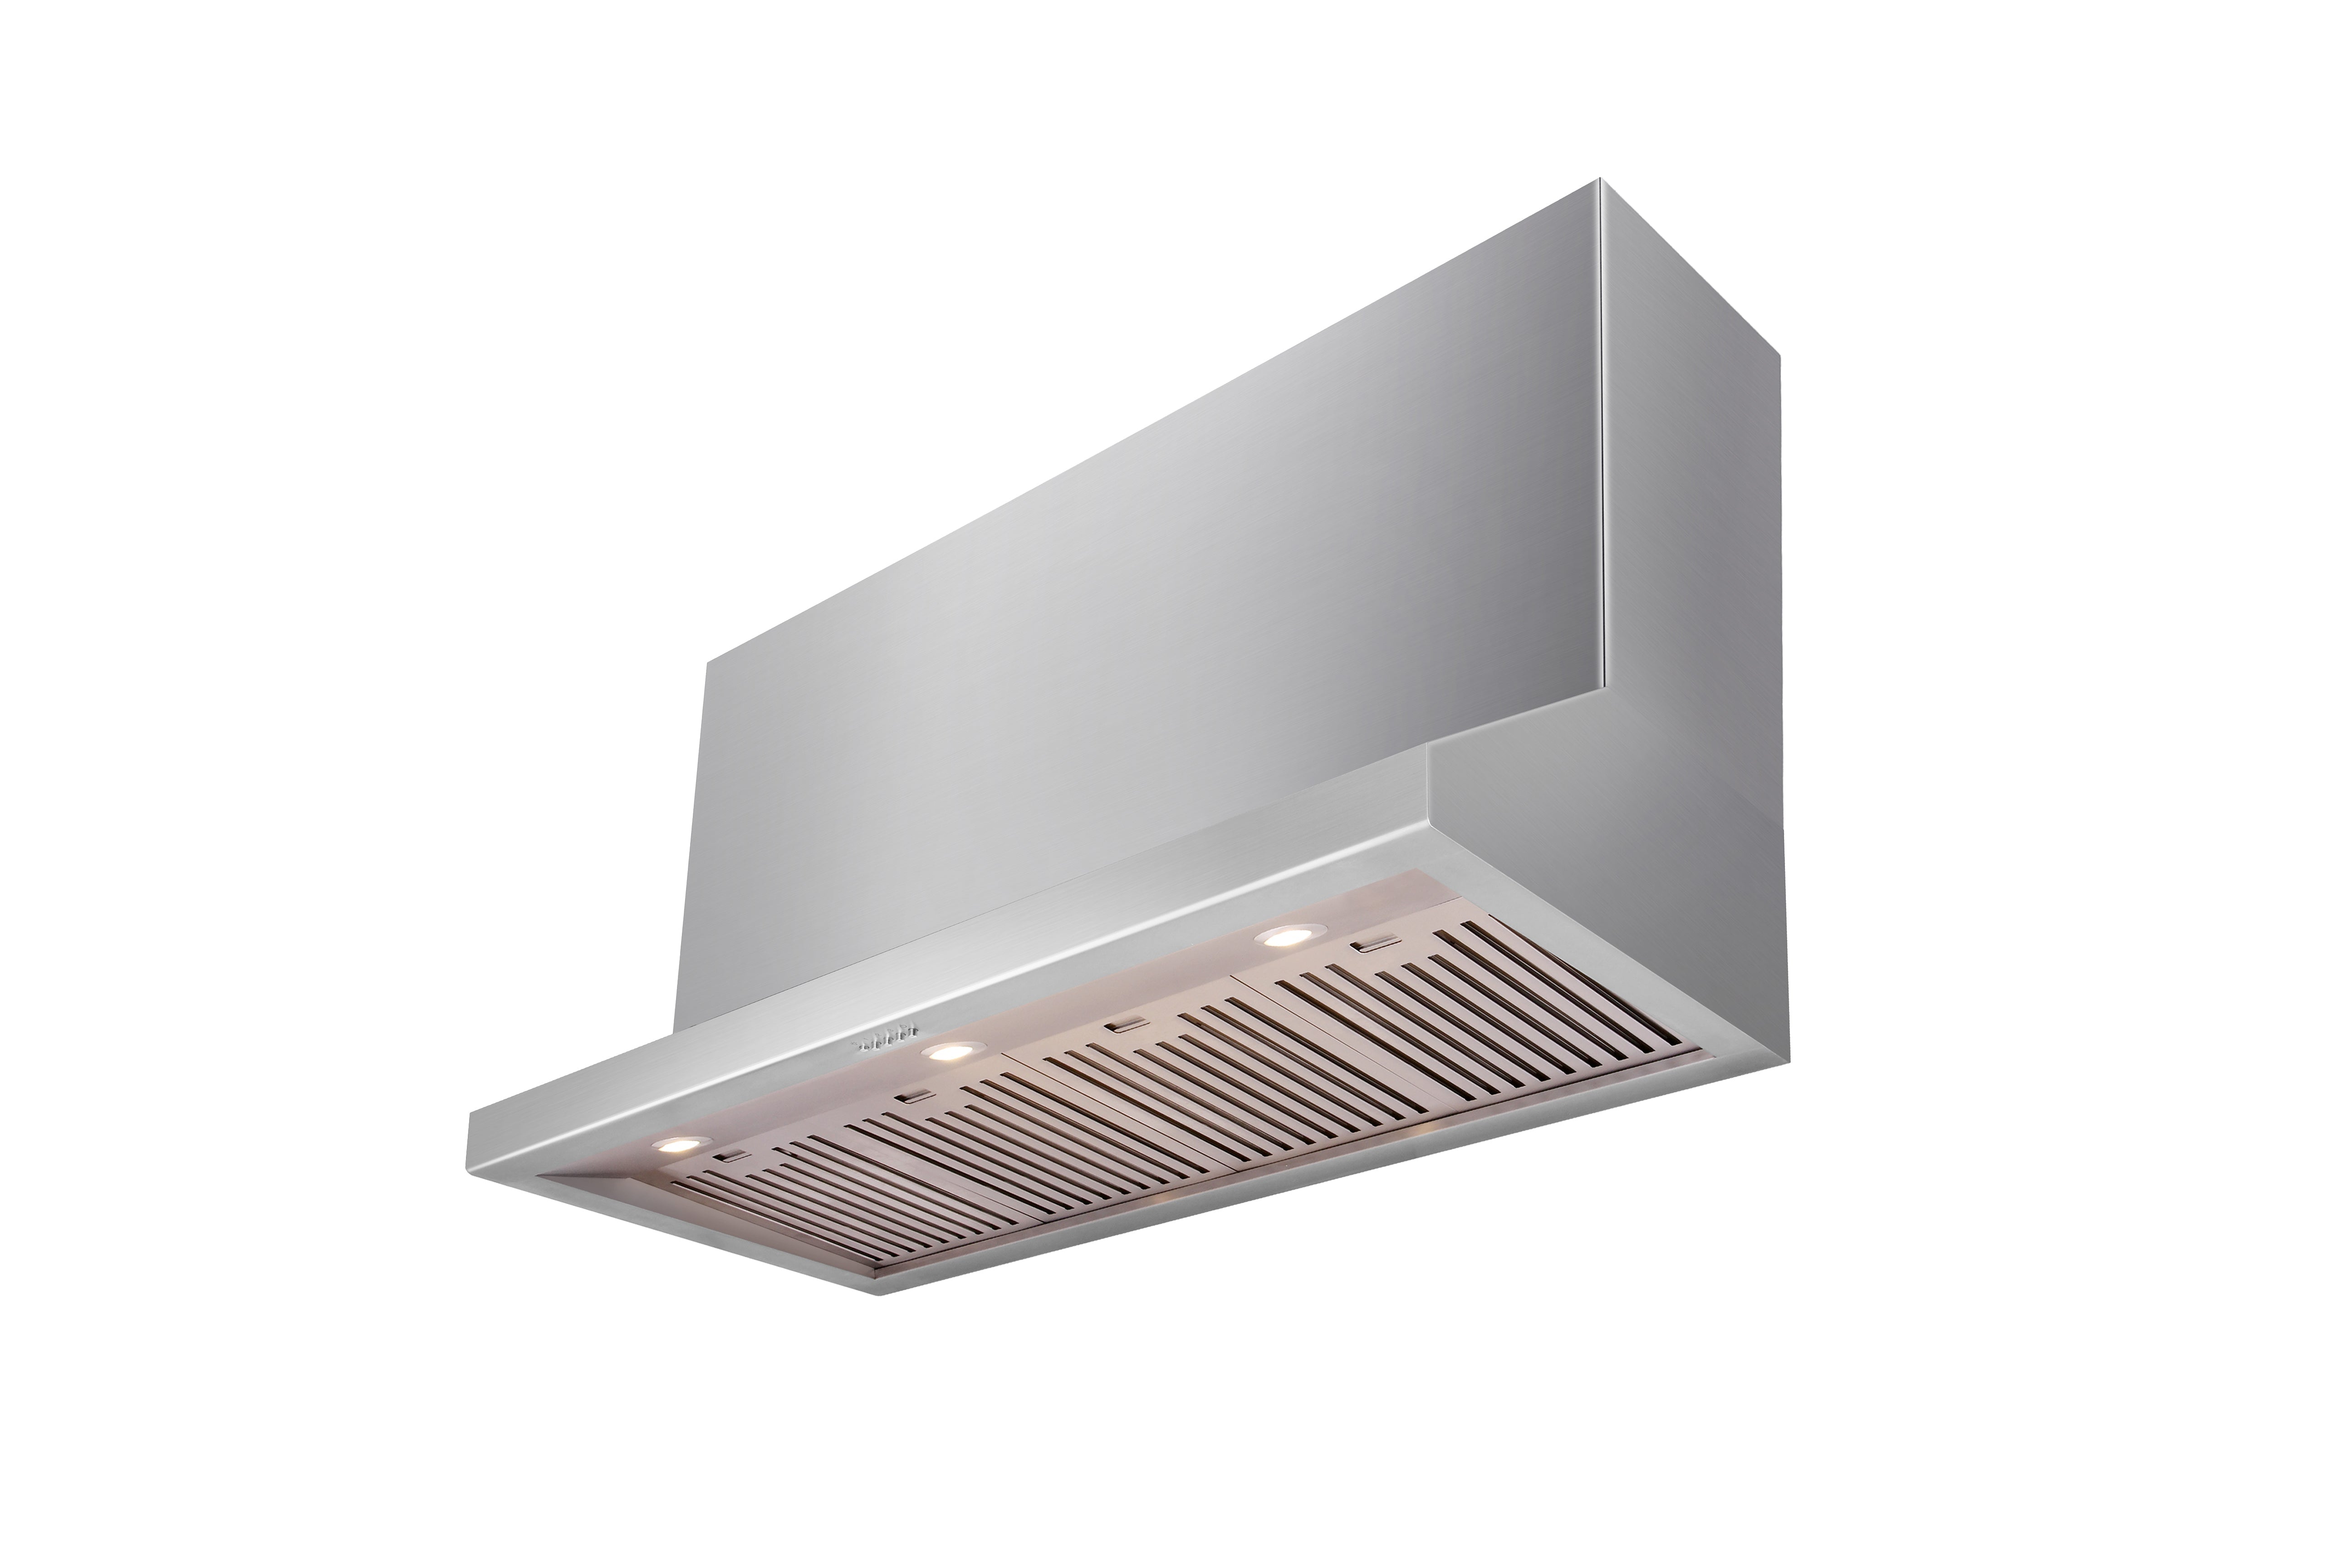 Thor Kitchen 48 Inch Professional Range Hood, 11 Inches Tall in Stainless Steel- Model TRH4806